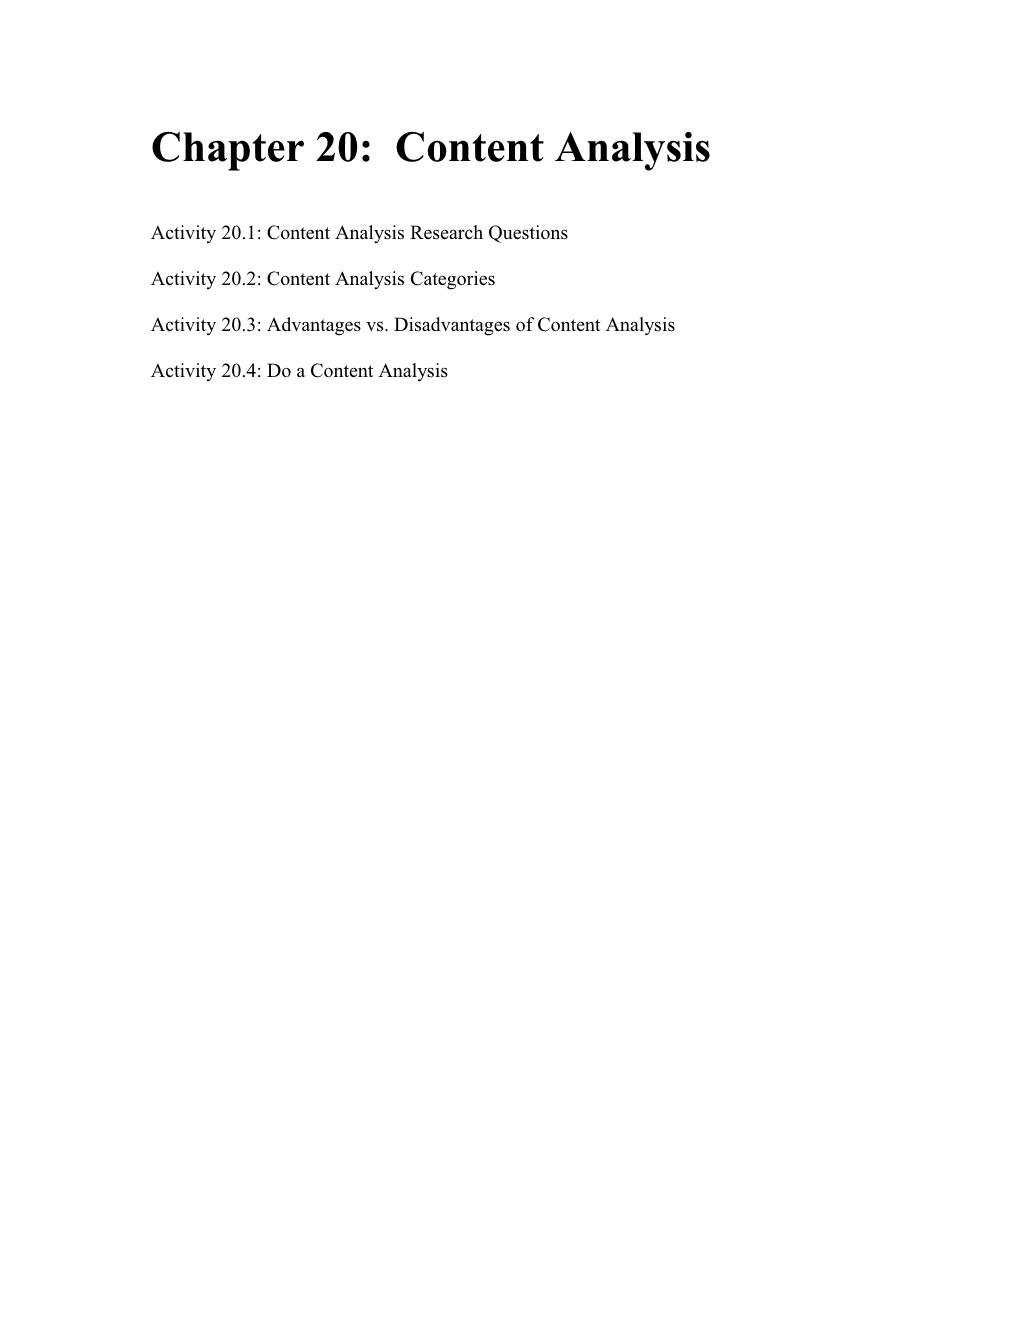 CHAPTER 20: Content Analysis